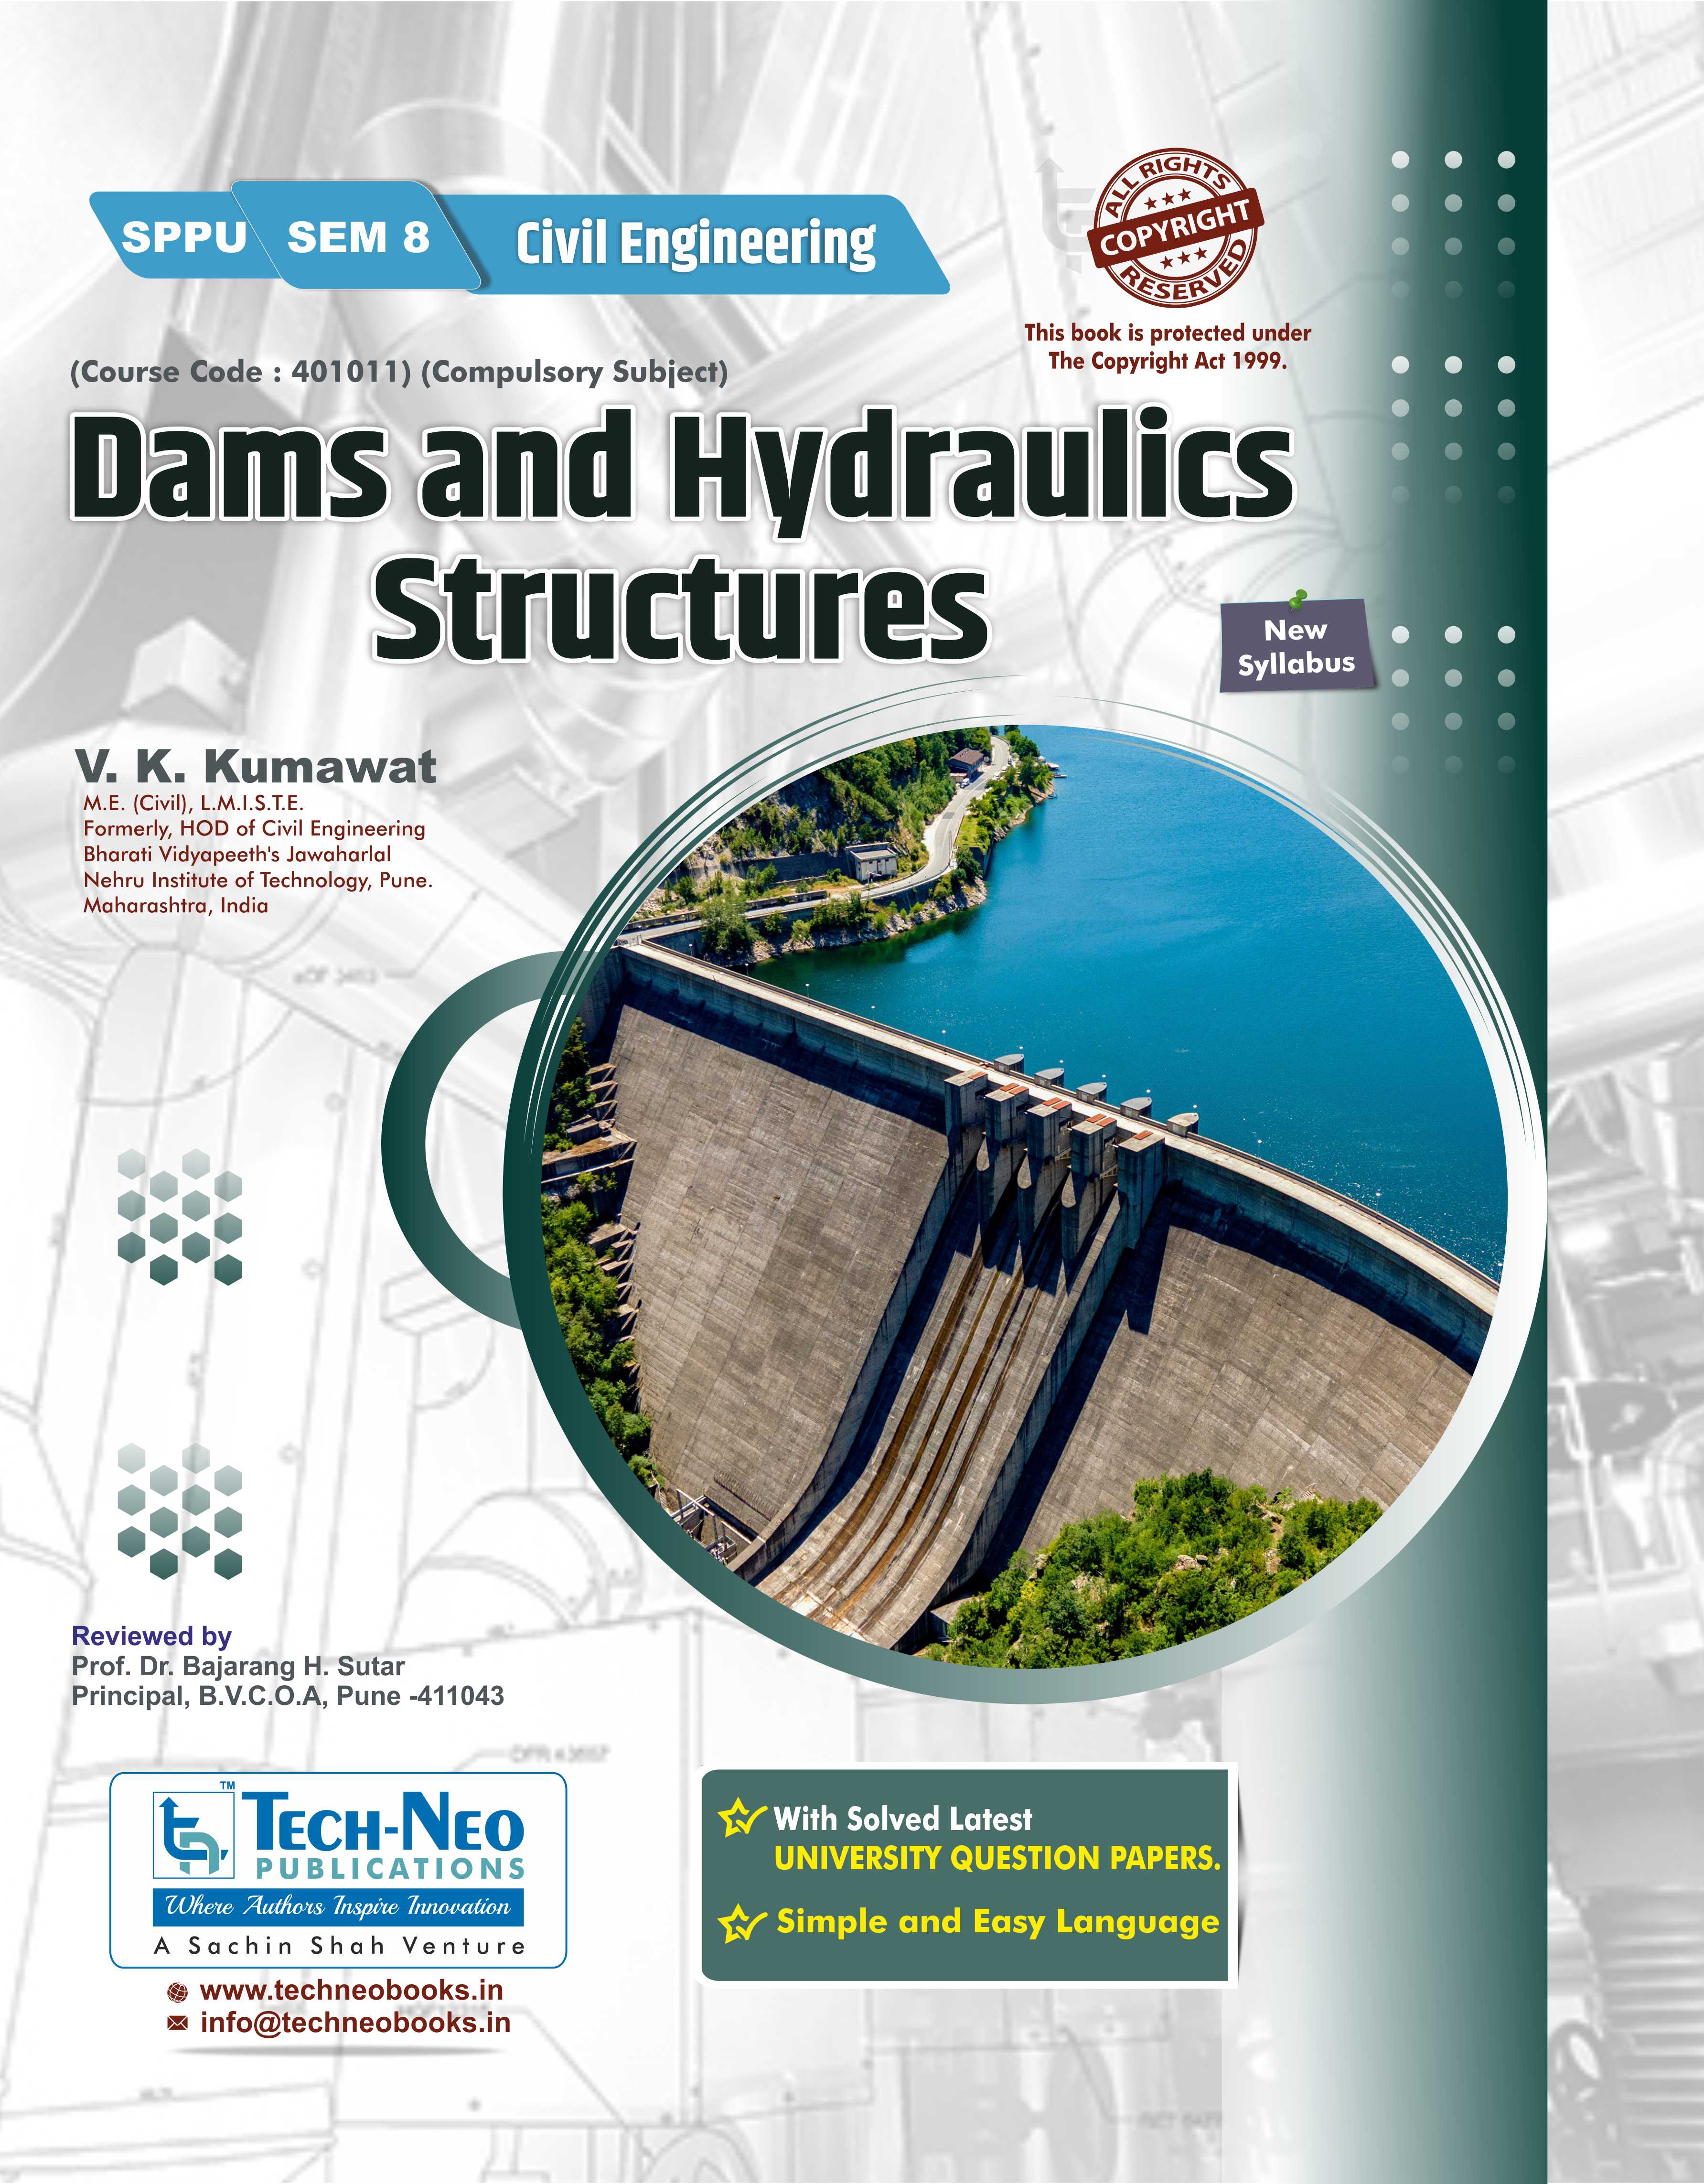 Dams and Hydraulics Structures